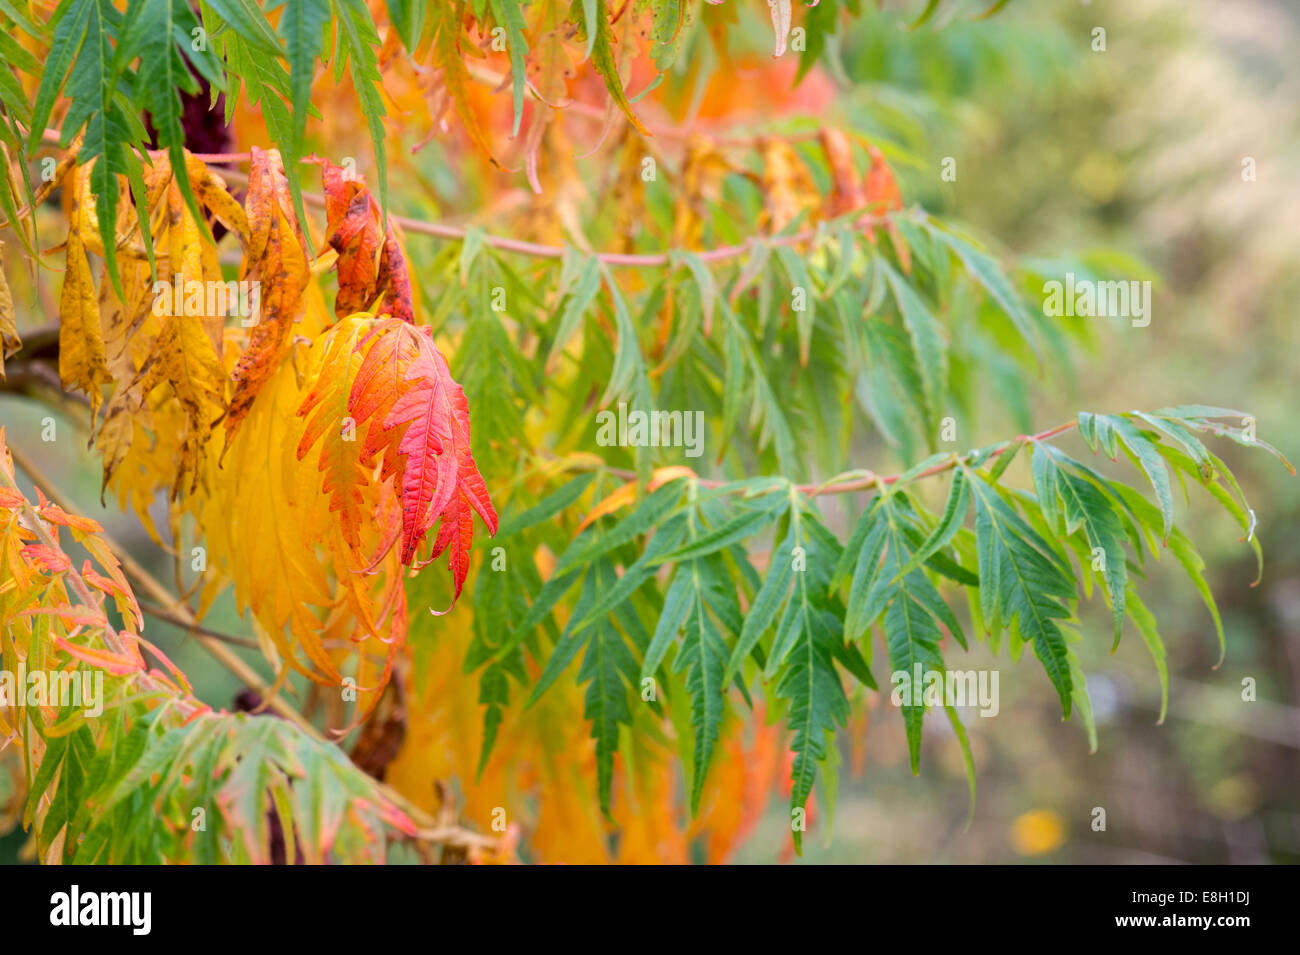 Rhus Typhina. Staghorn sumac or Stag's horn sumach plant in autumn Stock Photo